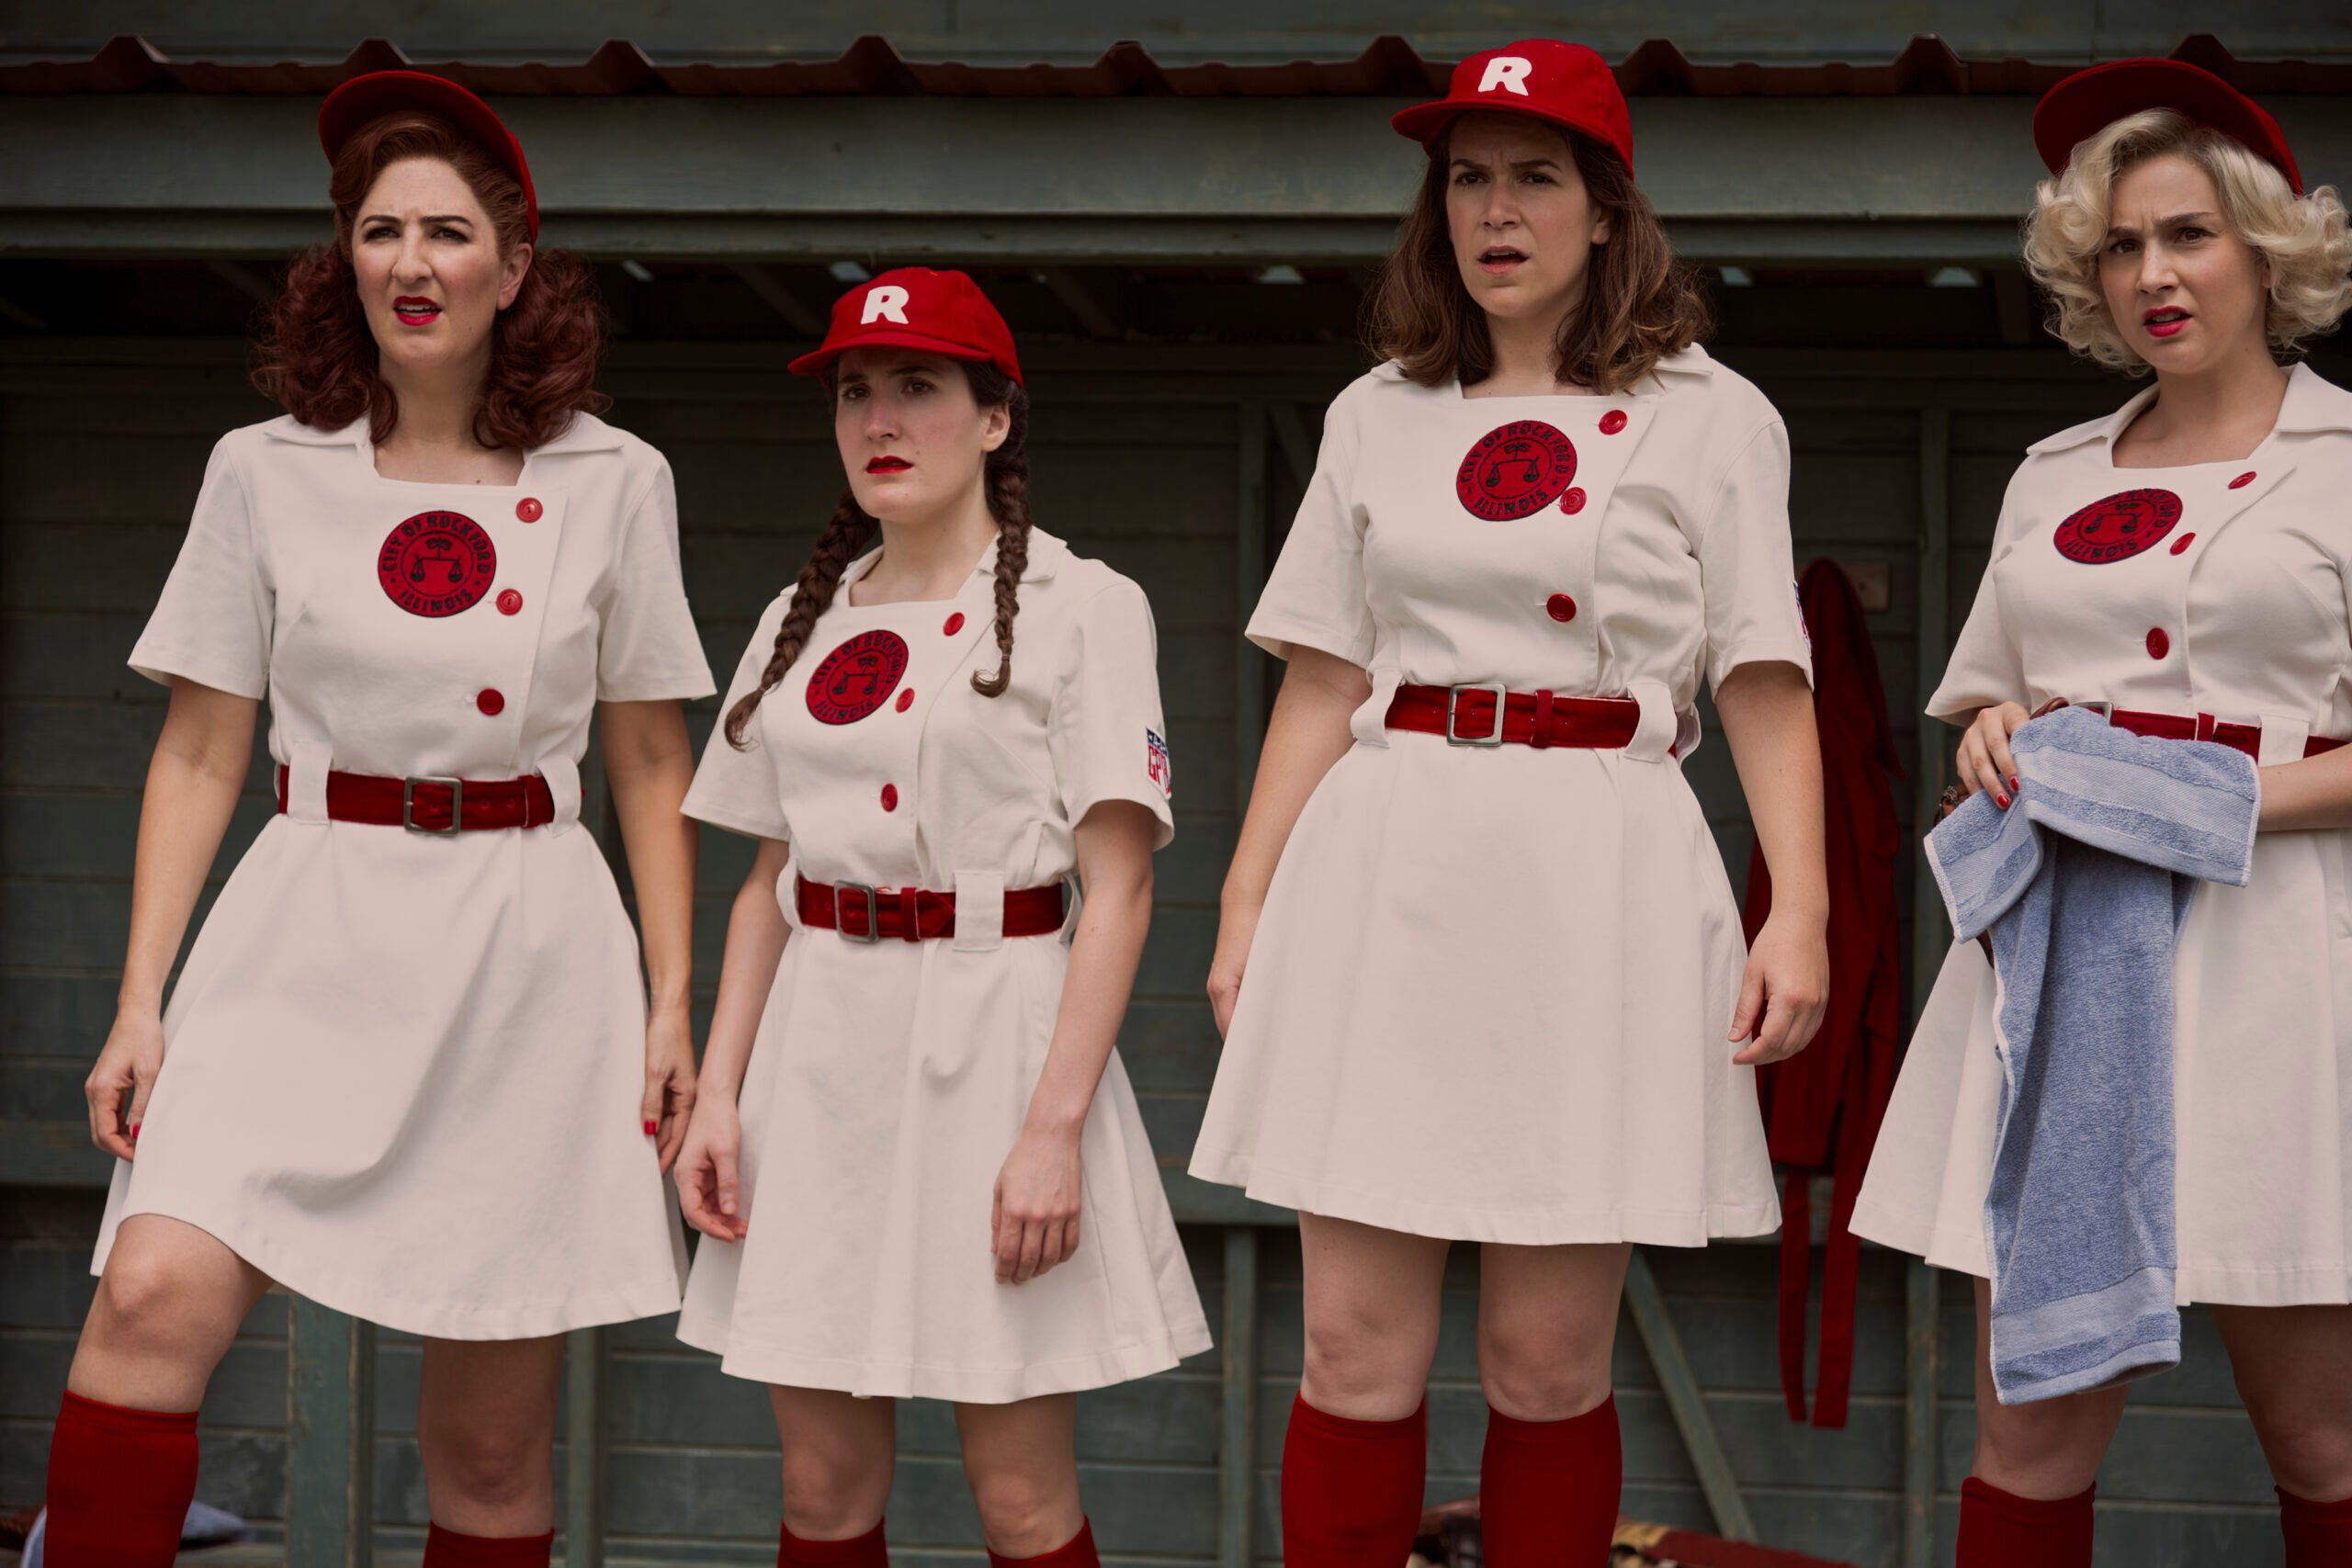 D'Arcy Carden, Kate Berlant, Abbi Jacobson, and Molly Ephraim in A League of Their Own